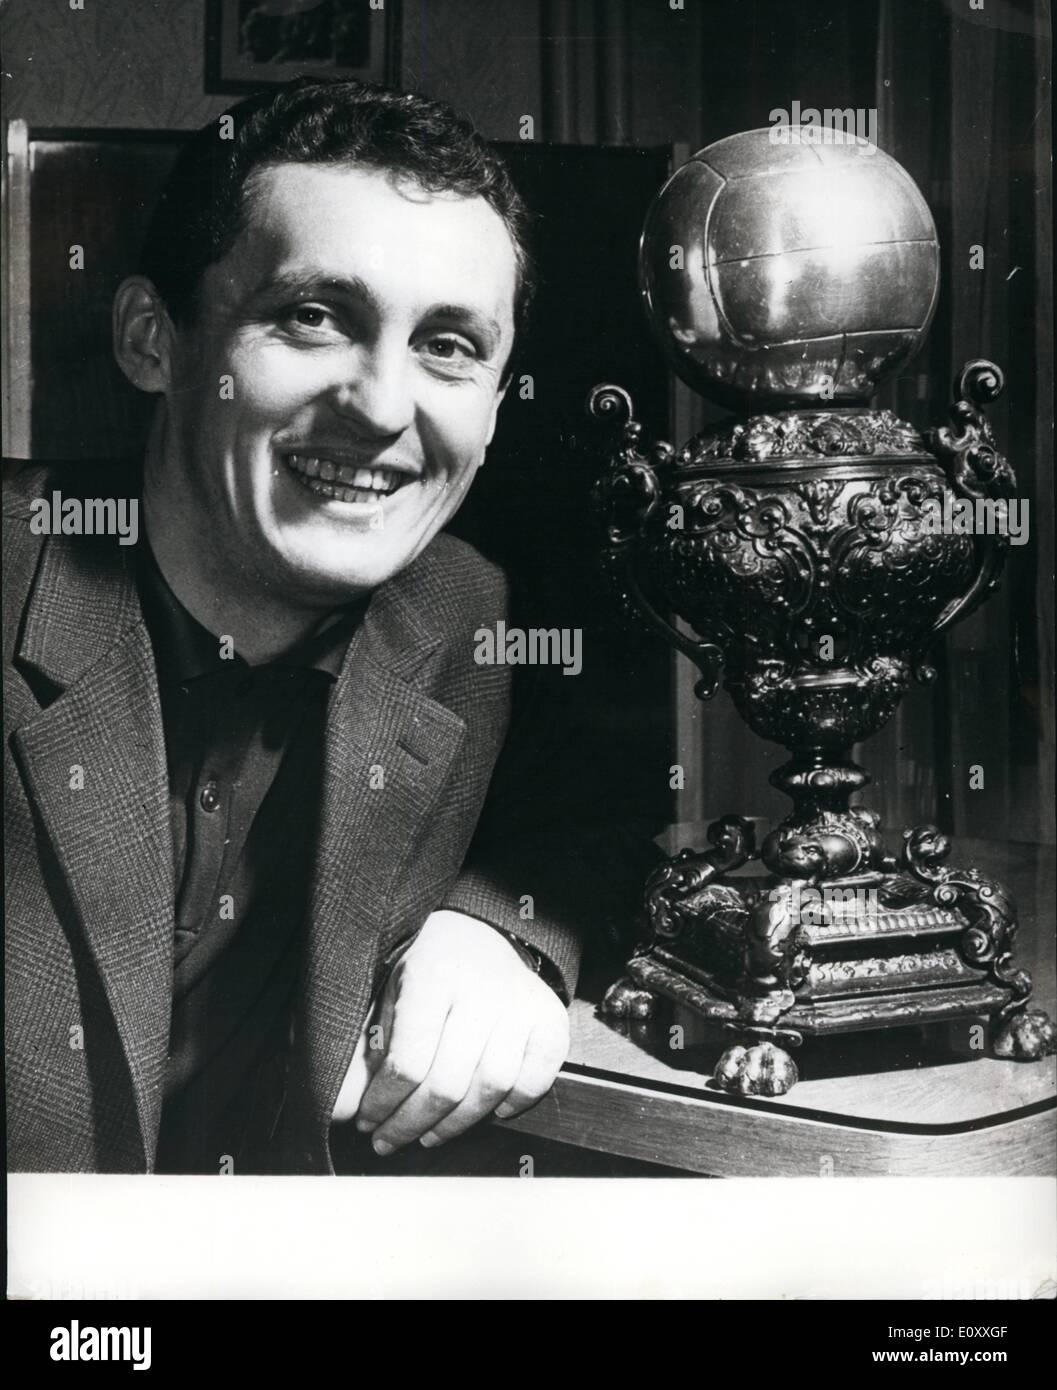 Jan. 01, 1968 - Fan Sends A Trophy To Florian Albert. Hungarian footballer, Florian Albert, the European Player of the Year 1967 - pictured with a decorative challenge trophy presented to him by Imre Heredi, an enthusiastic fan from Kiskunfelegyhaza. So this country town on the Great Hungarian plain preceded Paris from where Albert is to be awarded the official Golden Ball. Stock Photo